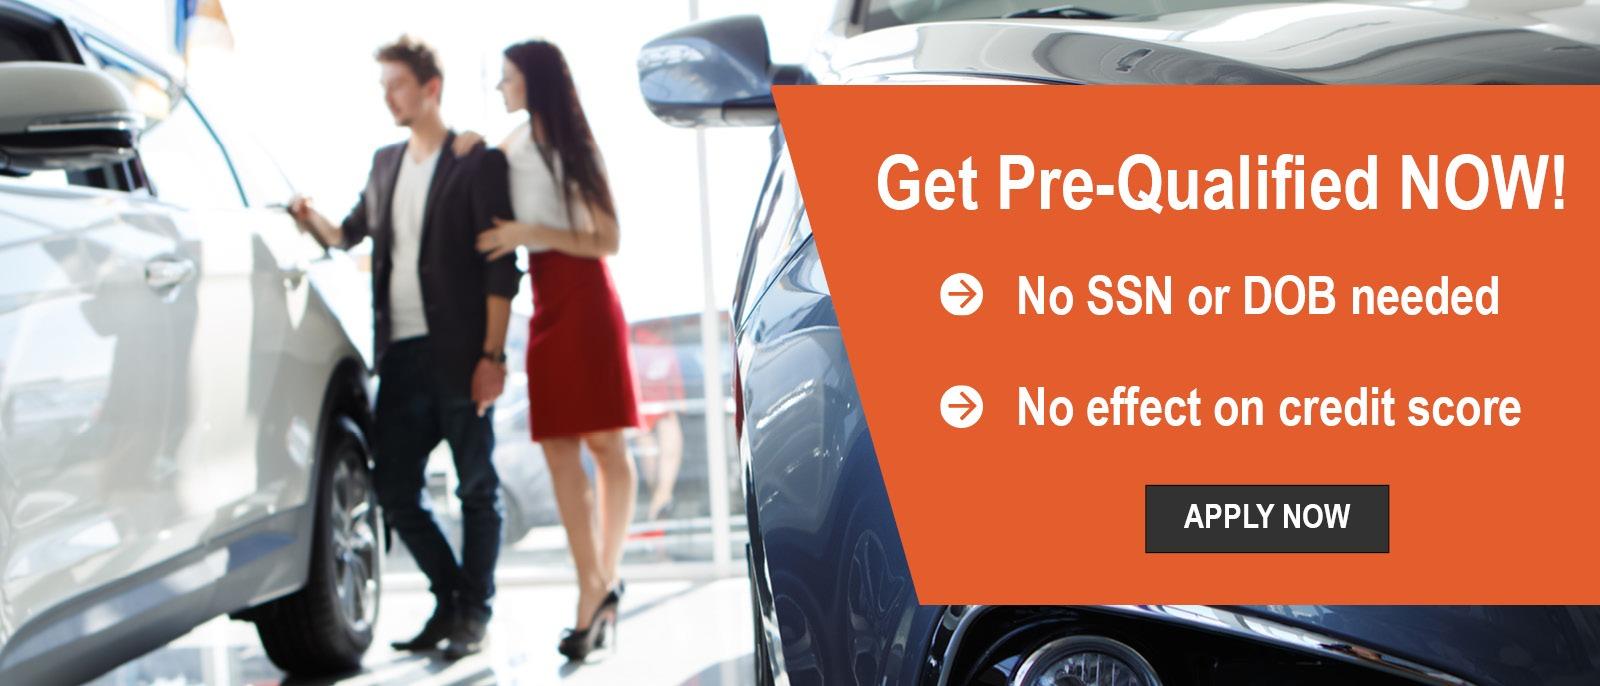 Get Pre-Qualified Now!